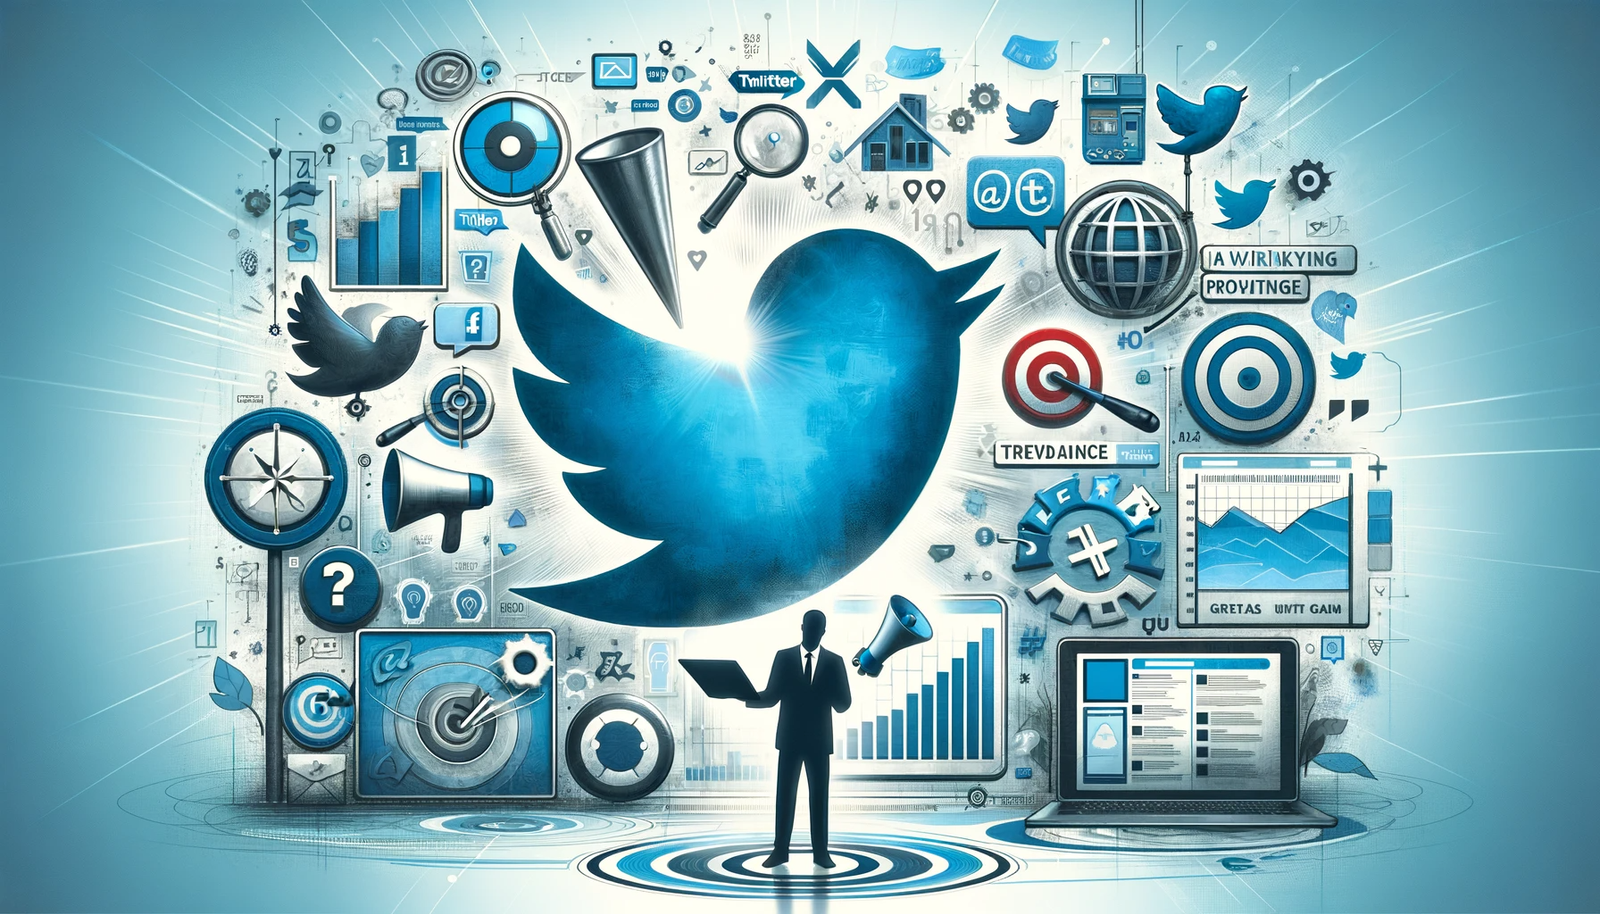 Is twitter a worthy platform to use to market your products?